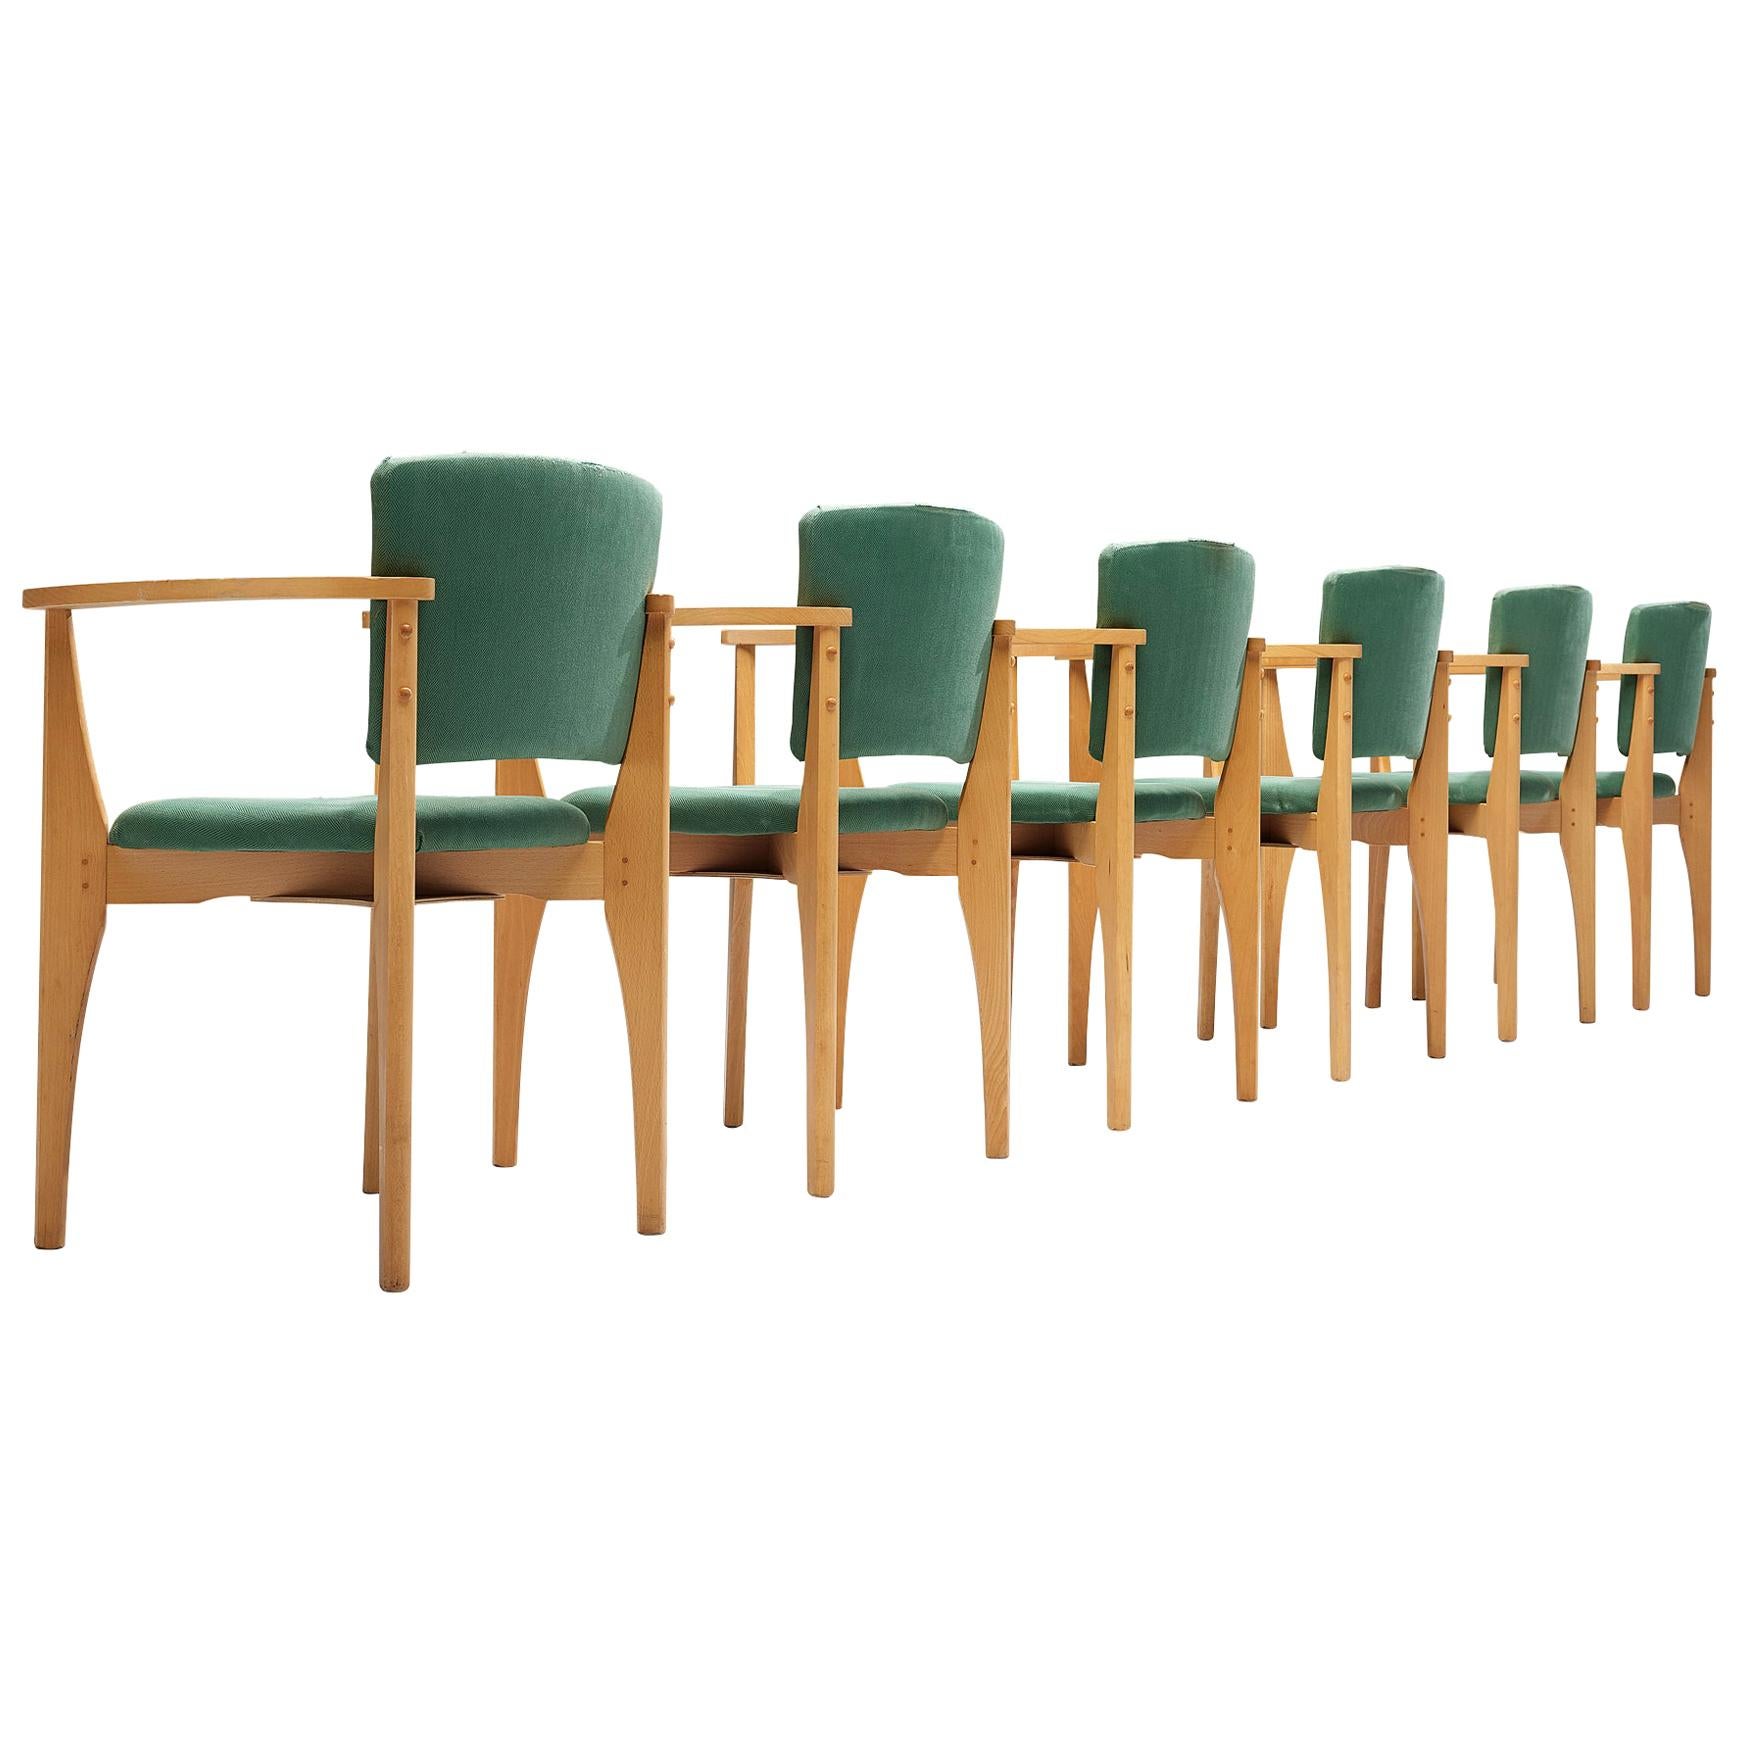 Set of Six Dining Chairs in Beech and Green Upholstery